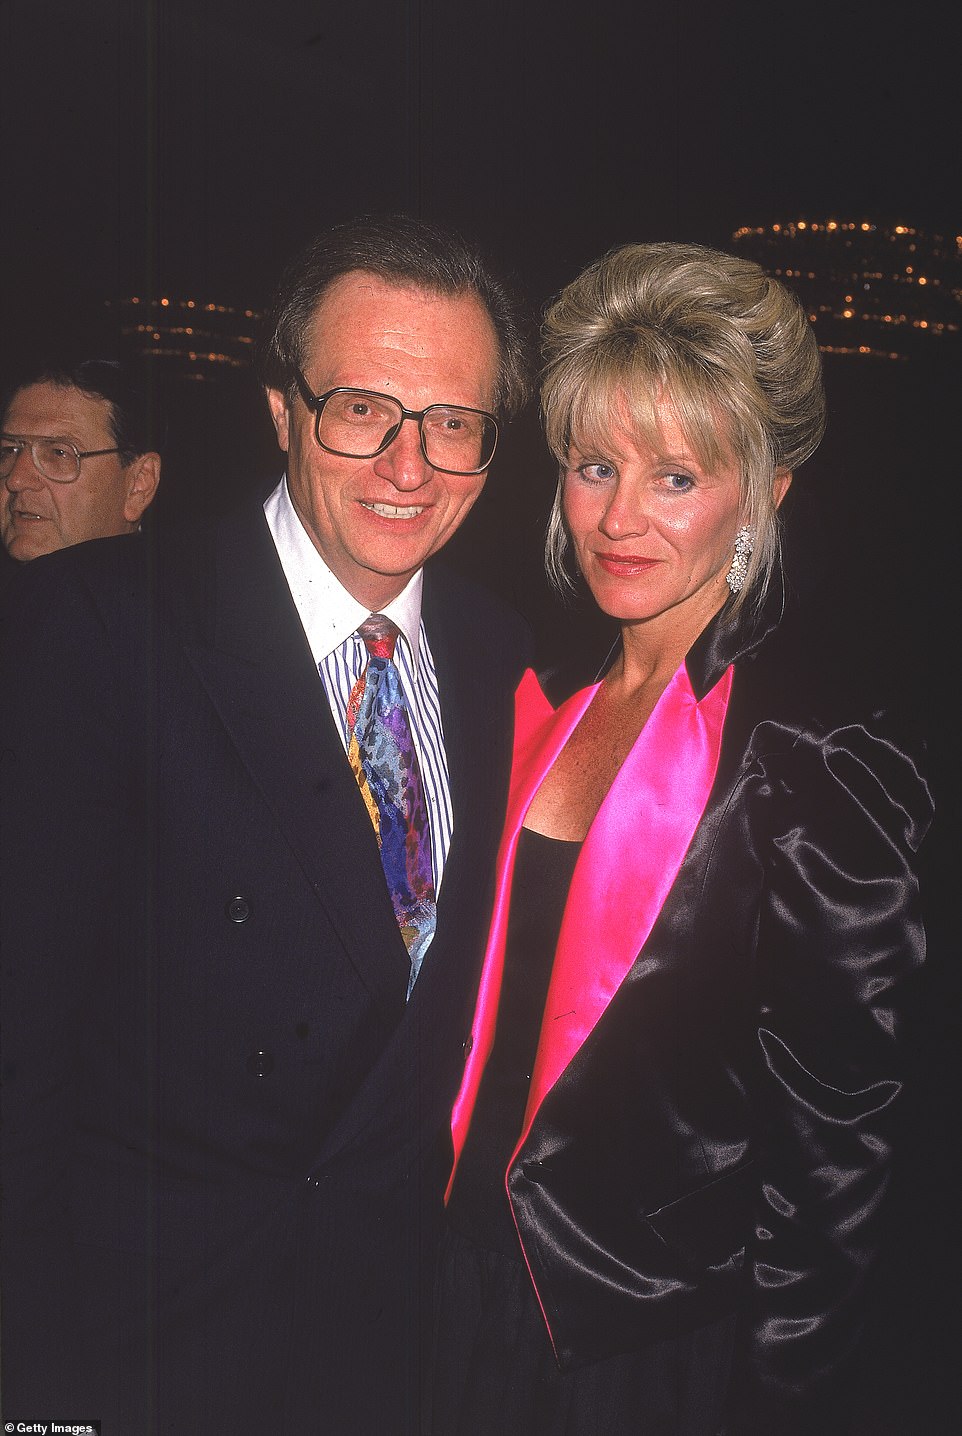 Larry King is pictured with his sixth wife (and seventh marriage), Julie Alexander, he proposed on their first date and got married three months later. The couple divorced in 1992, the couple had no children. King didn't meet his son, Larry King Jr. from his second wife, Annette Kaye until he was 33-years-old. By the time Larry Jr was born, King was already married to his third wife. 'I knew there was a Larry King Jr out there, I'd heard that, but I didn't know he was mine. The marriage was very short and she told me if it's a boy, I'm gonna name him Larry King Jr,' explained the King to The New York Post in 2009. 'Then I never heard again'